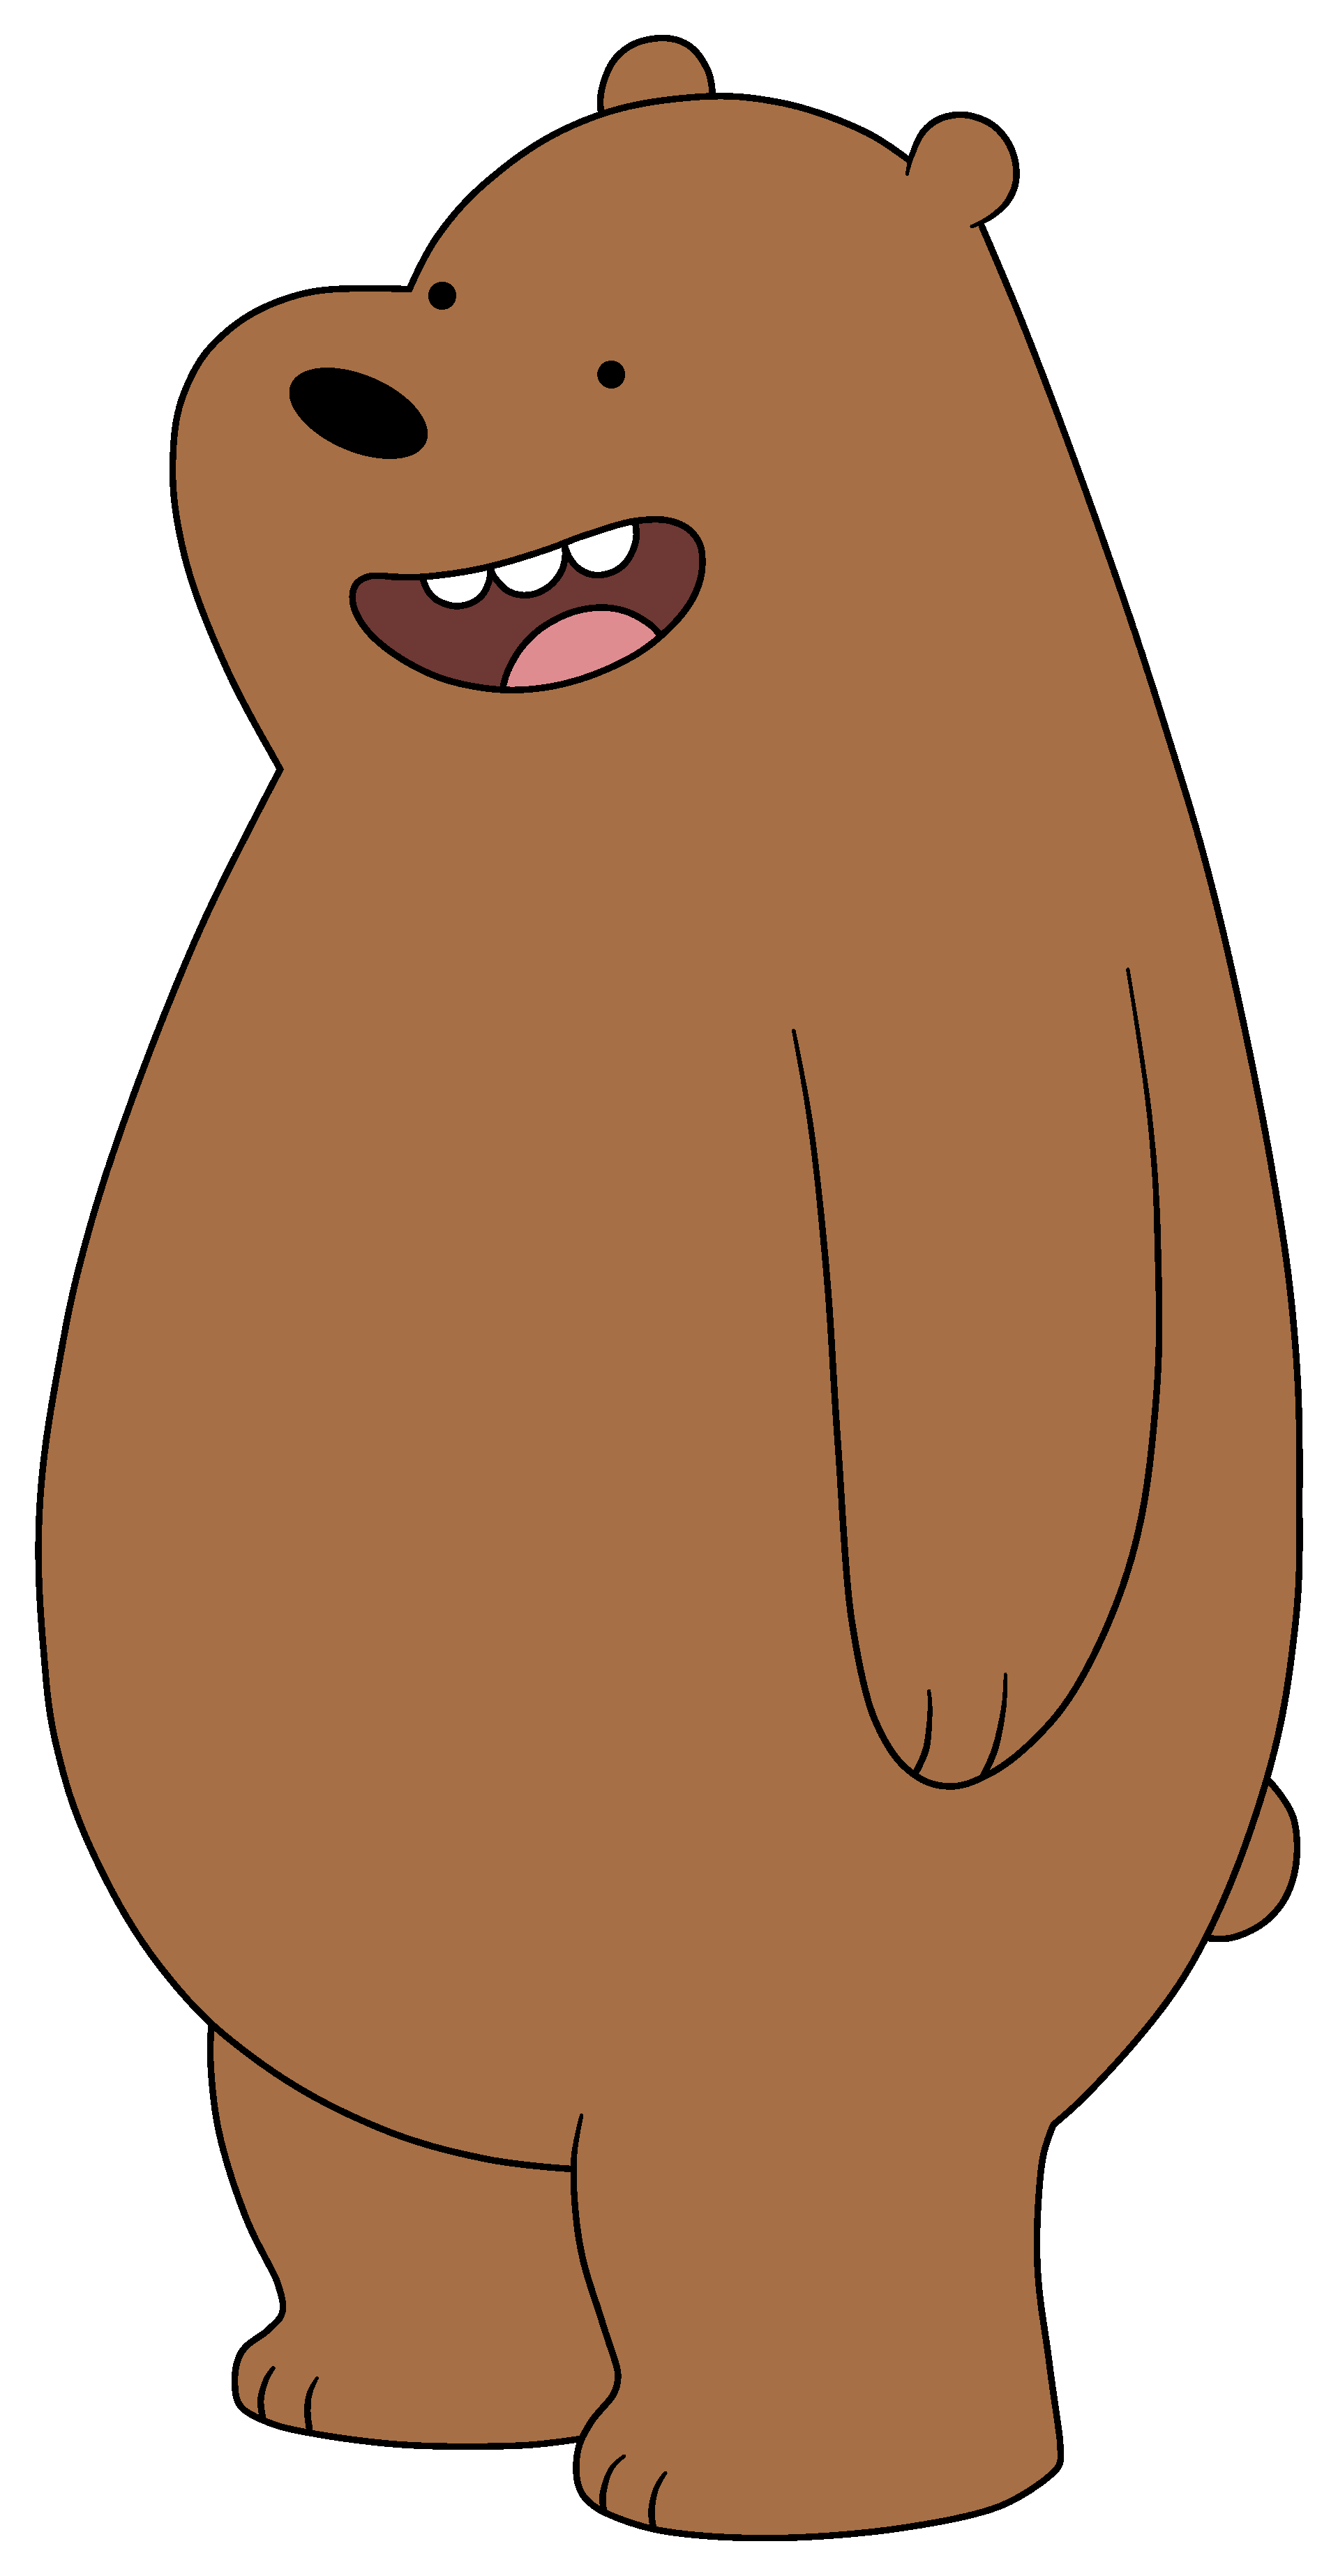 Walrus clipart brown. Image grizzly bear standing